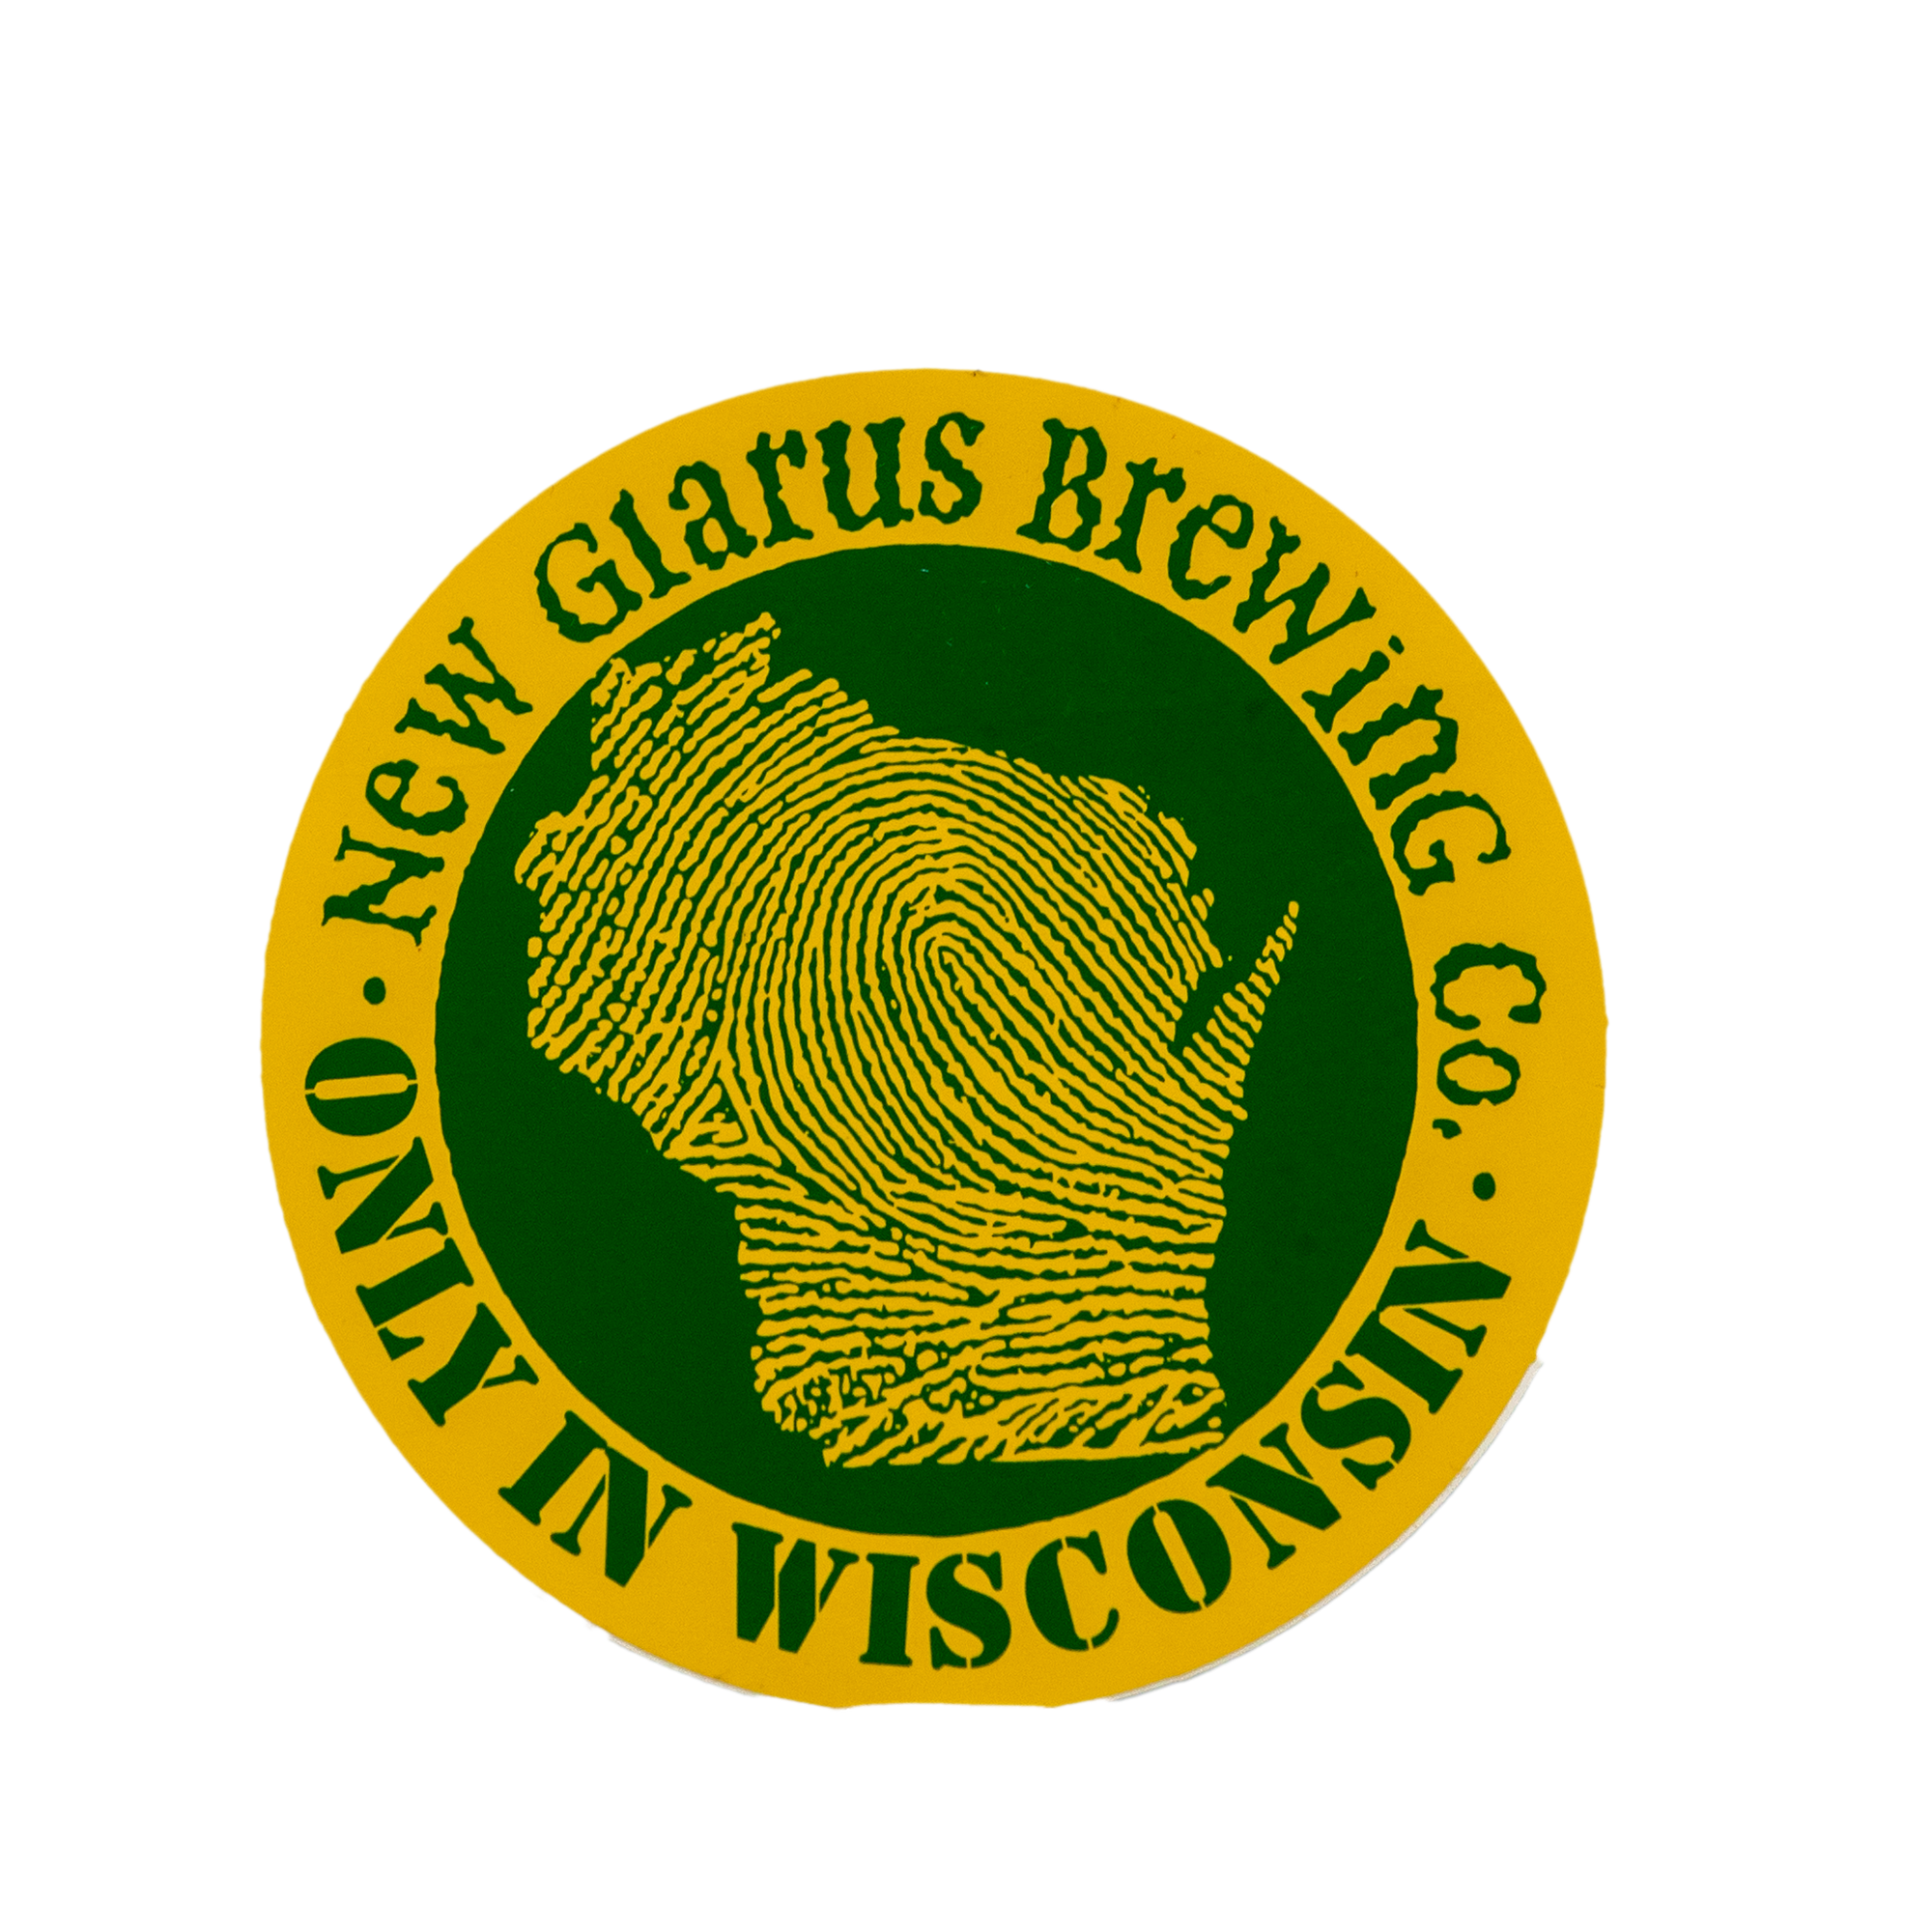 Circle sticker in bright yellow with New Glarus Brewing Co. Only In Wisconsin surrounding the state of Wisconsin in green.